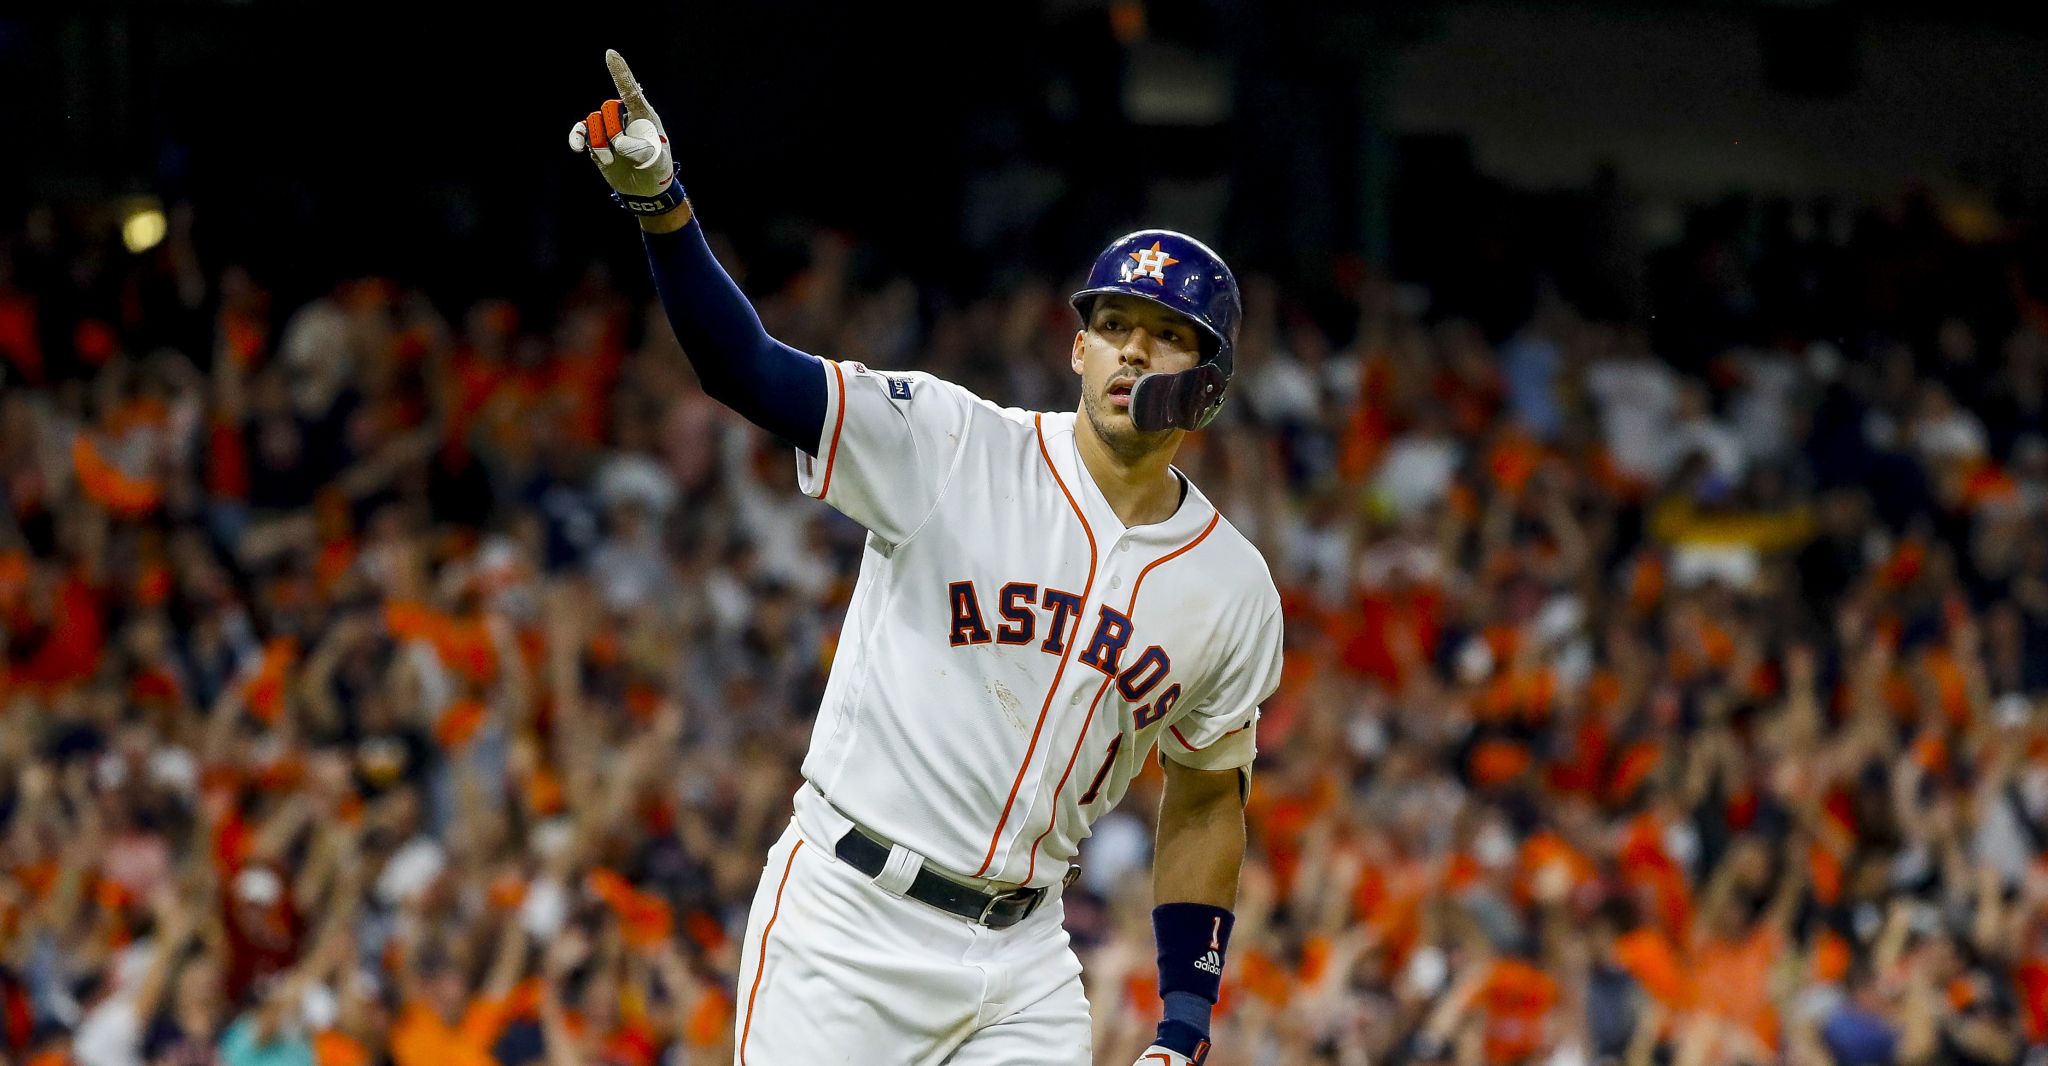 Josh Criswell on X: Carlos Correa having some fun with his former